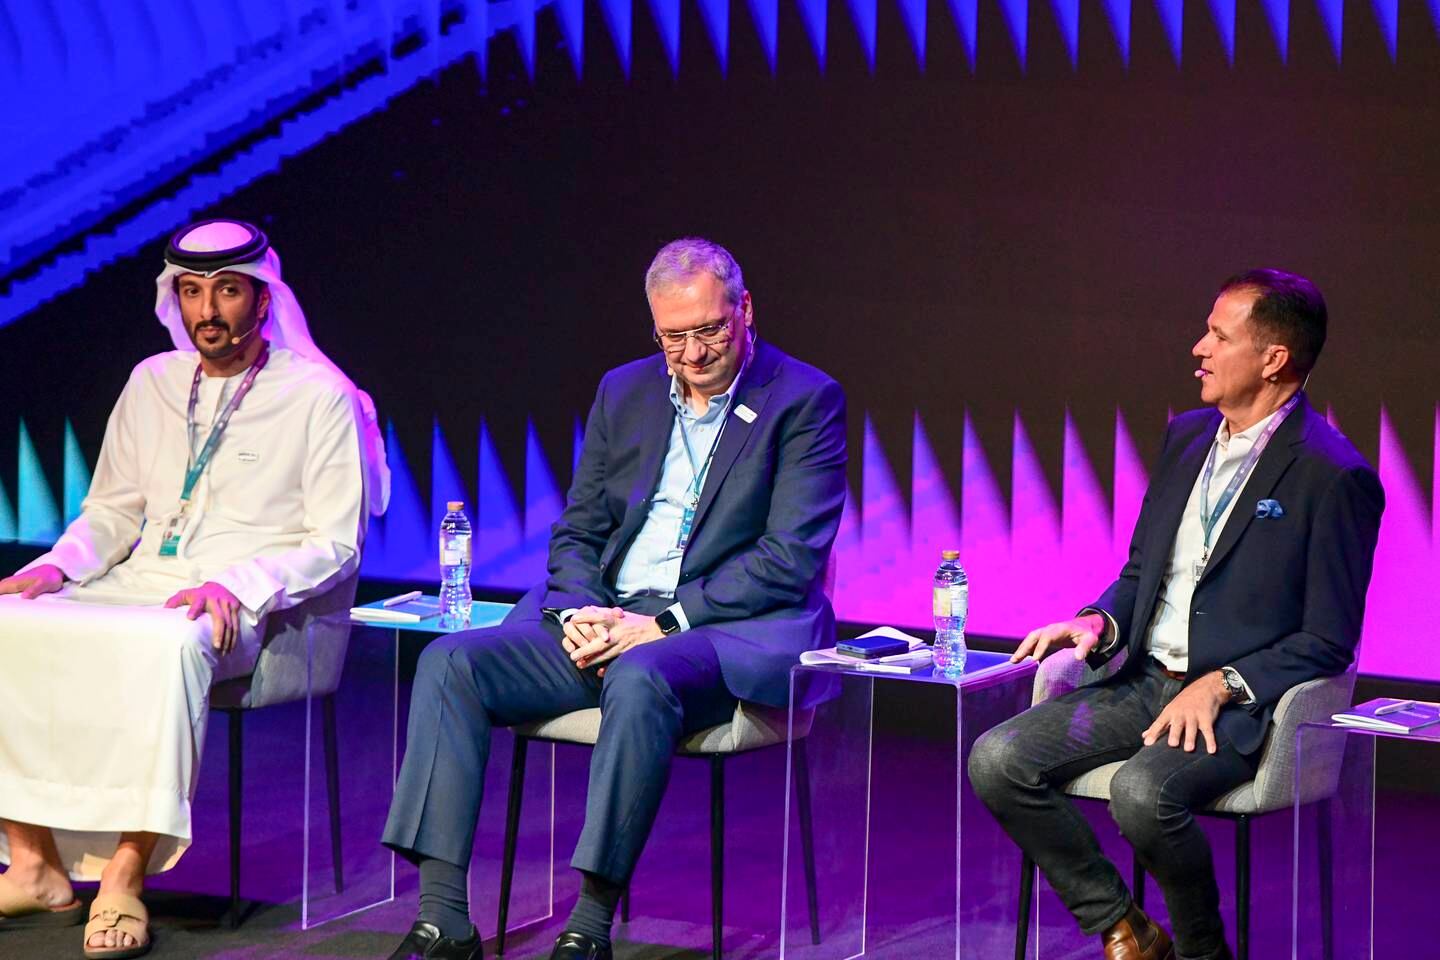 From left, Abdulla bin Touq, UAE Minister of Economy, Bashar Kilani, managing director of Accenture, and Mark Zaleski, managing director and partner at BCG Digital Ventures, during a panel discussion at the Dubai Metaverse Assembly on Wednesday. Khushnum Bhandari / The National